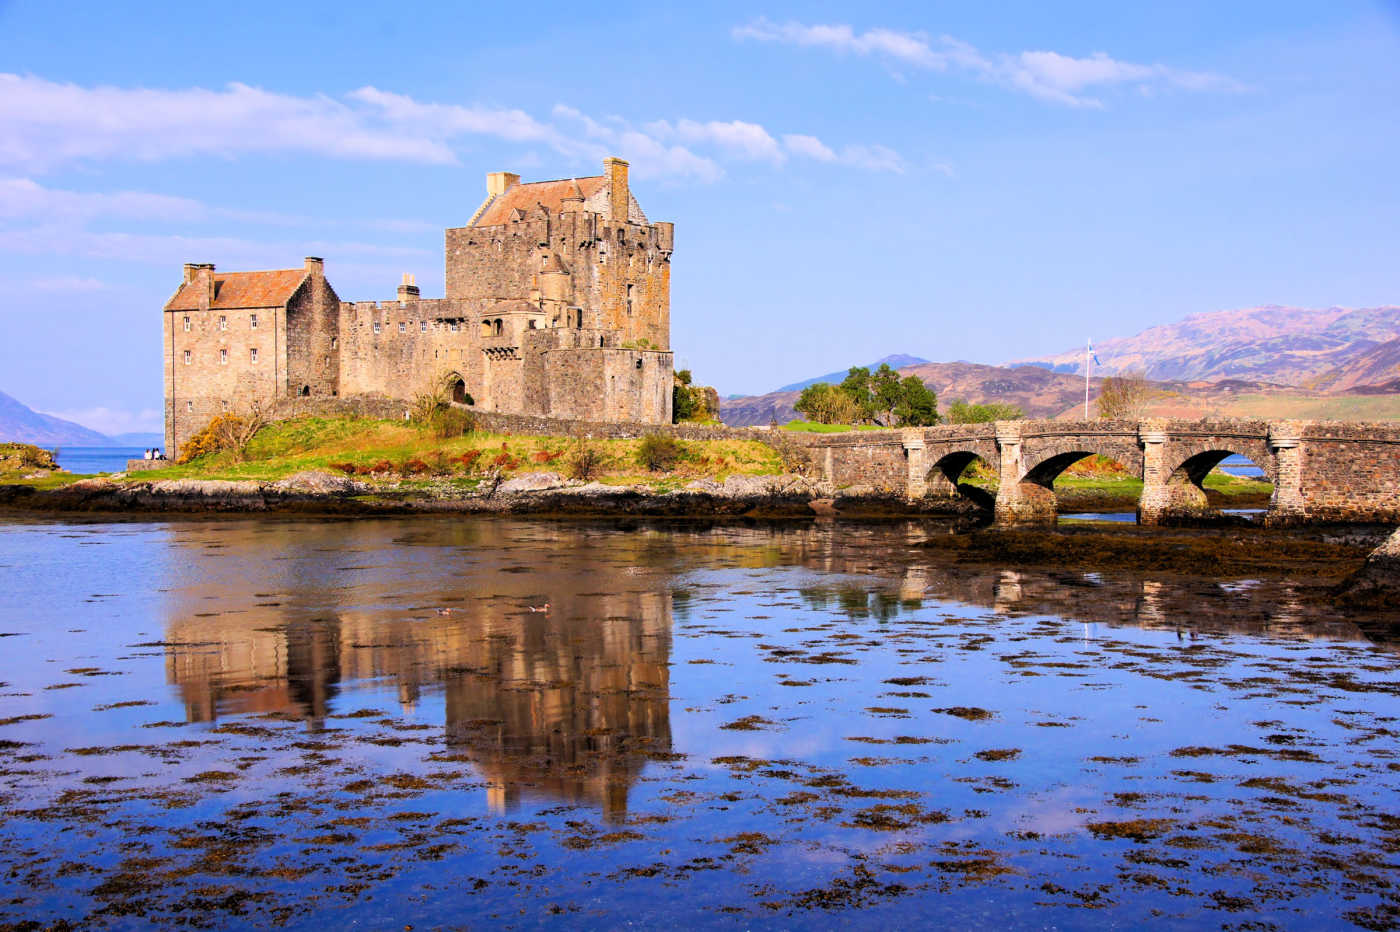 Scottish Highlands Vacations, Tours & Travel Packages